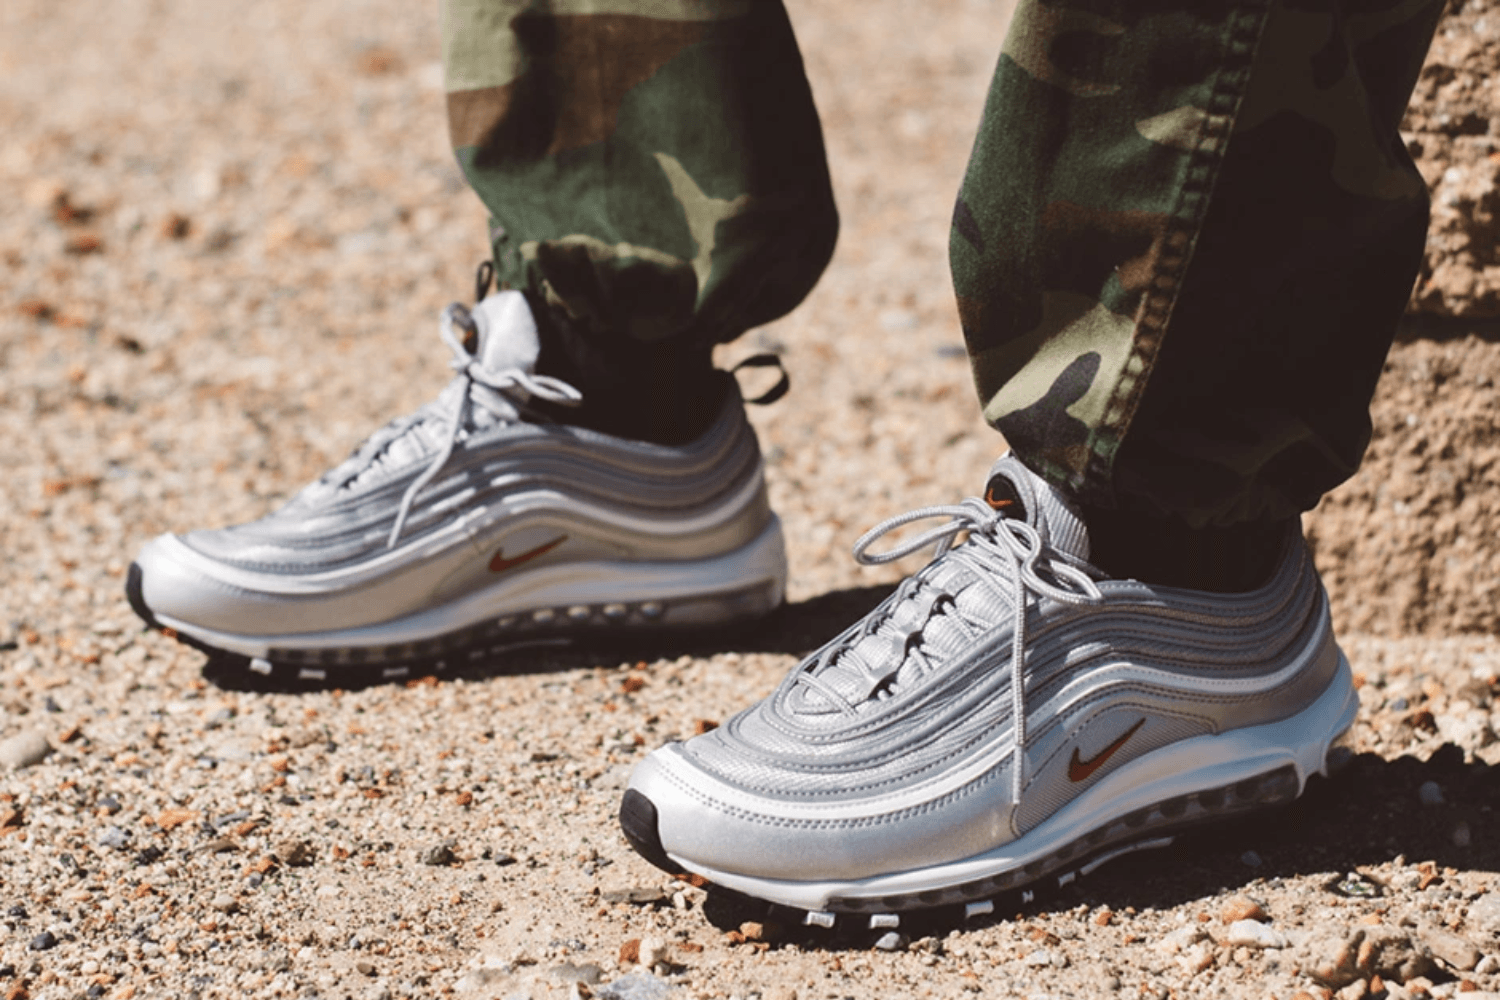 How to style the Nike Air Max 97